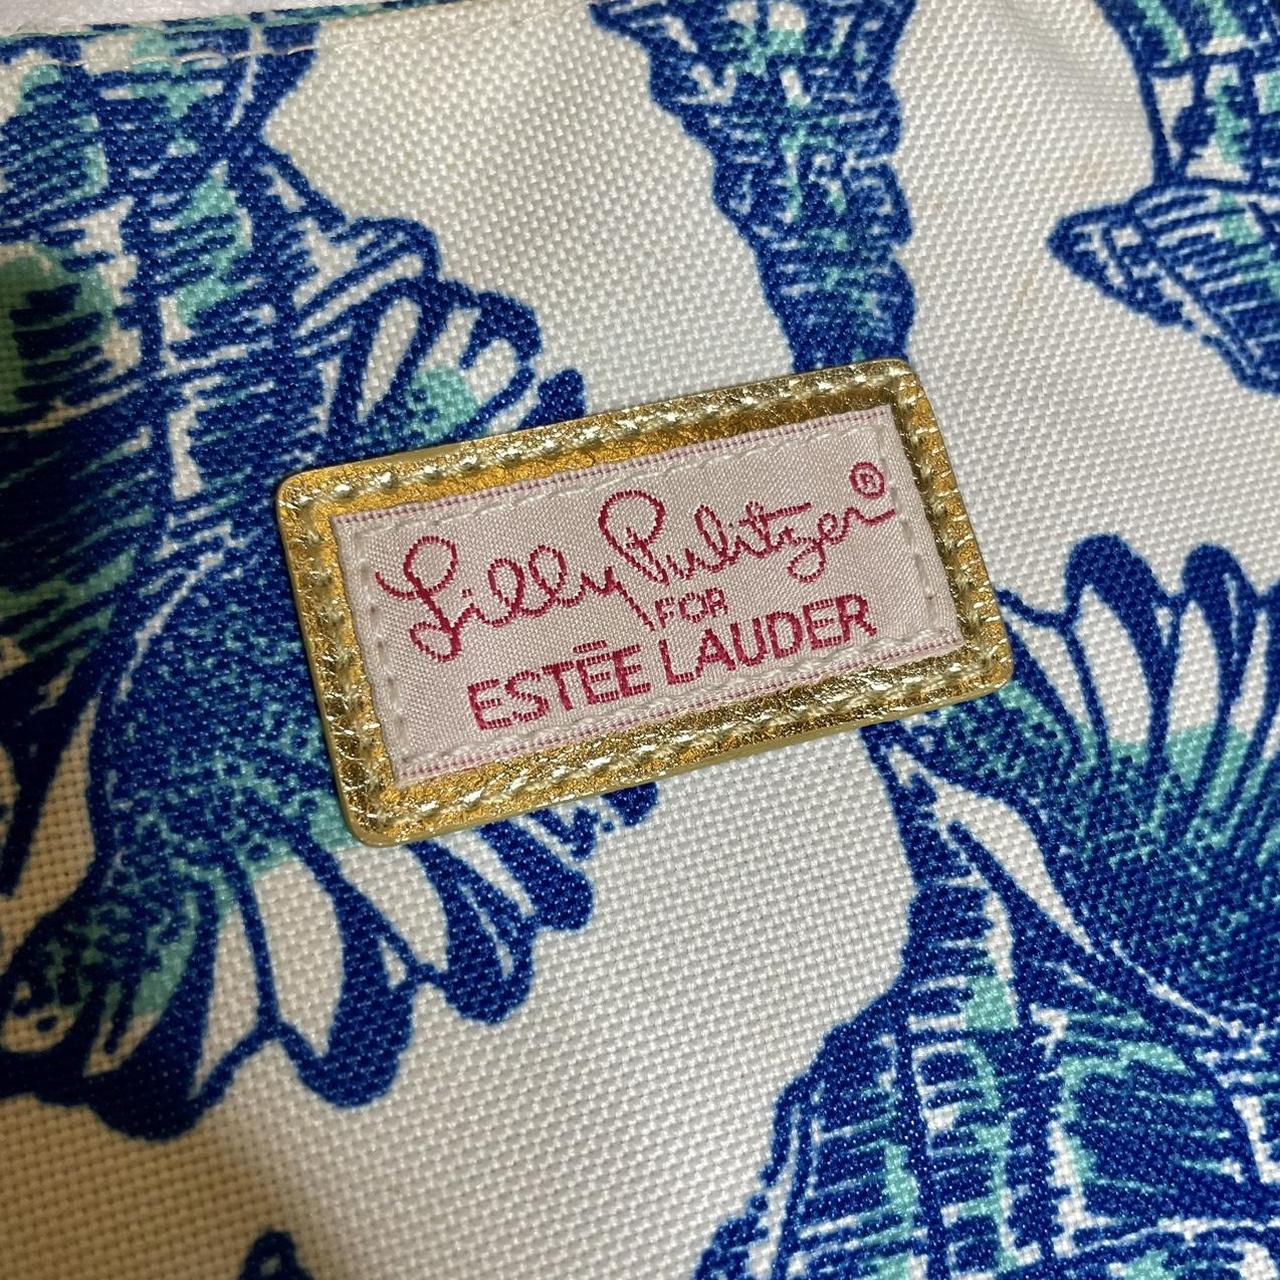 Lilly Pulitzer Women's White and Blue Bag (3)